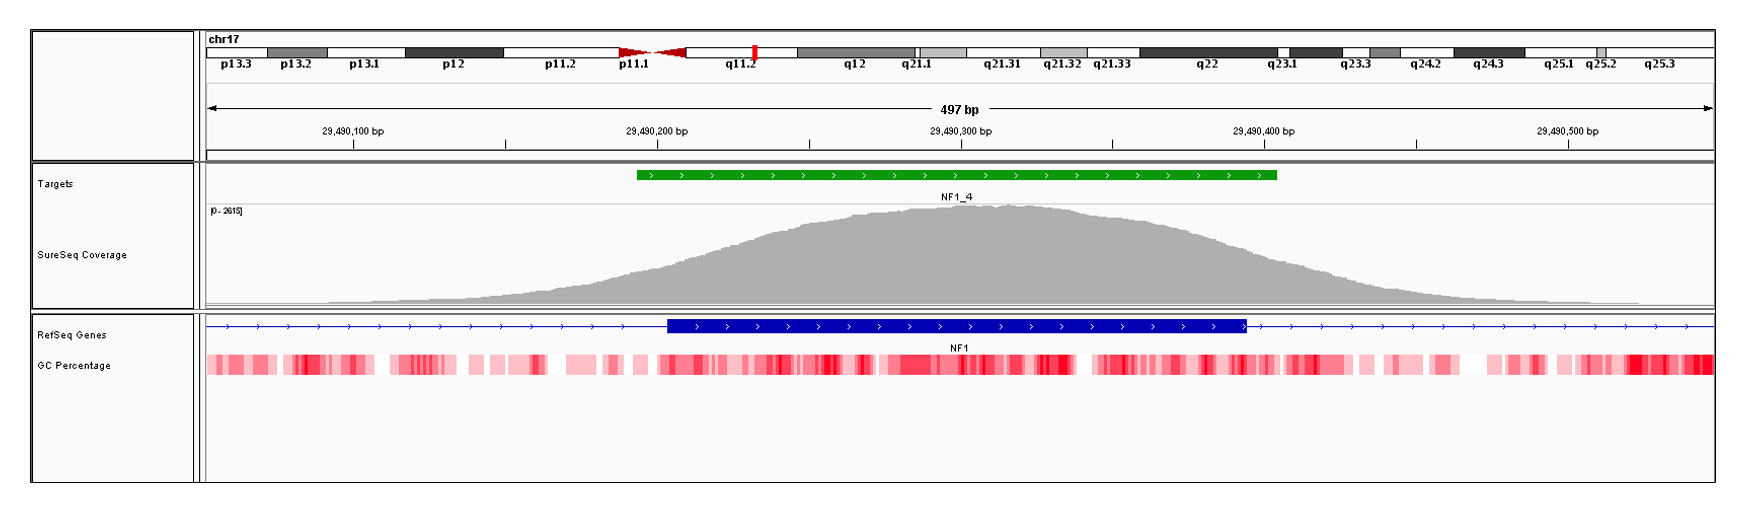 NF1 Exon 4 (hg19 chr17:29490204-29490394). Depth of coverage per base (grey). Targeted region (green). Gene coding region as defined by RefSeq (blue). GC percentage (red). Image